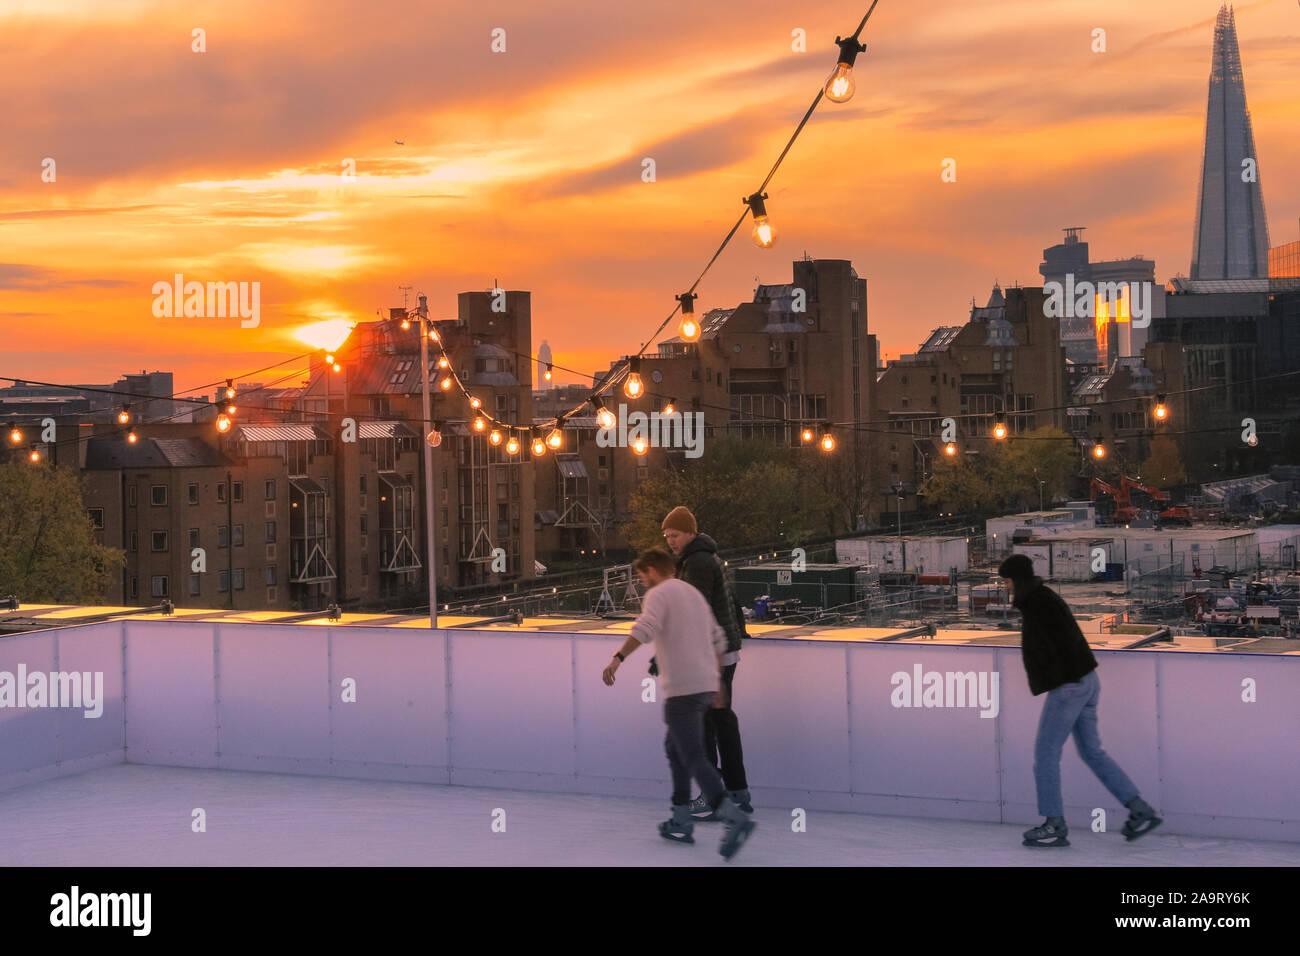 Tobacco Dock, London, UK, 17th November 2019. Skating at sunset. People enjoy spectacular views across to the City of London at London's trendy Skylight ice rink, a rooftop at the historic Tobacco Dock complex in Wapping, East London. Credit: Imageplotter/Alamy Live News Stock Photo